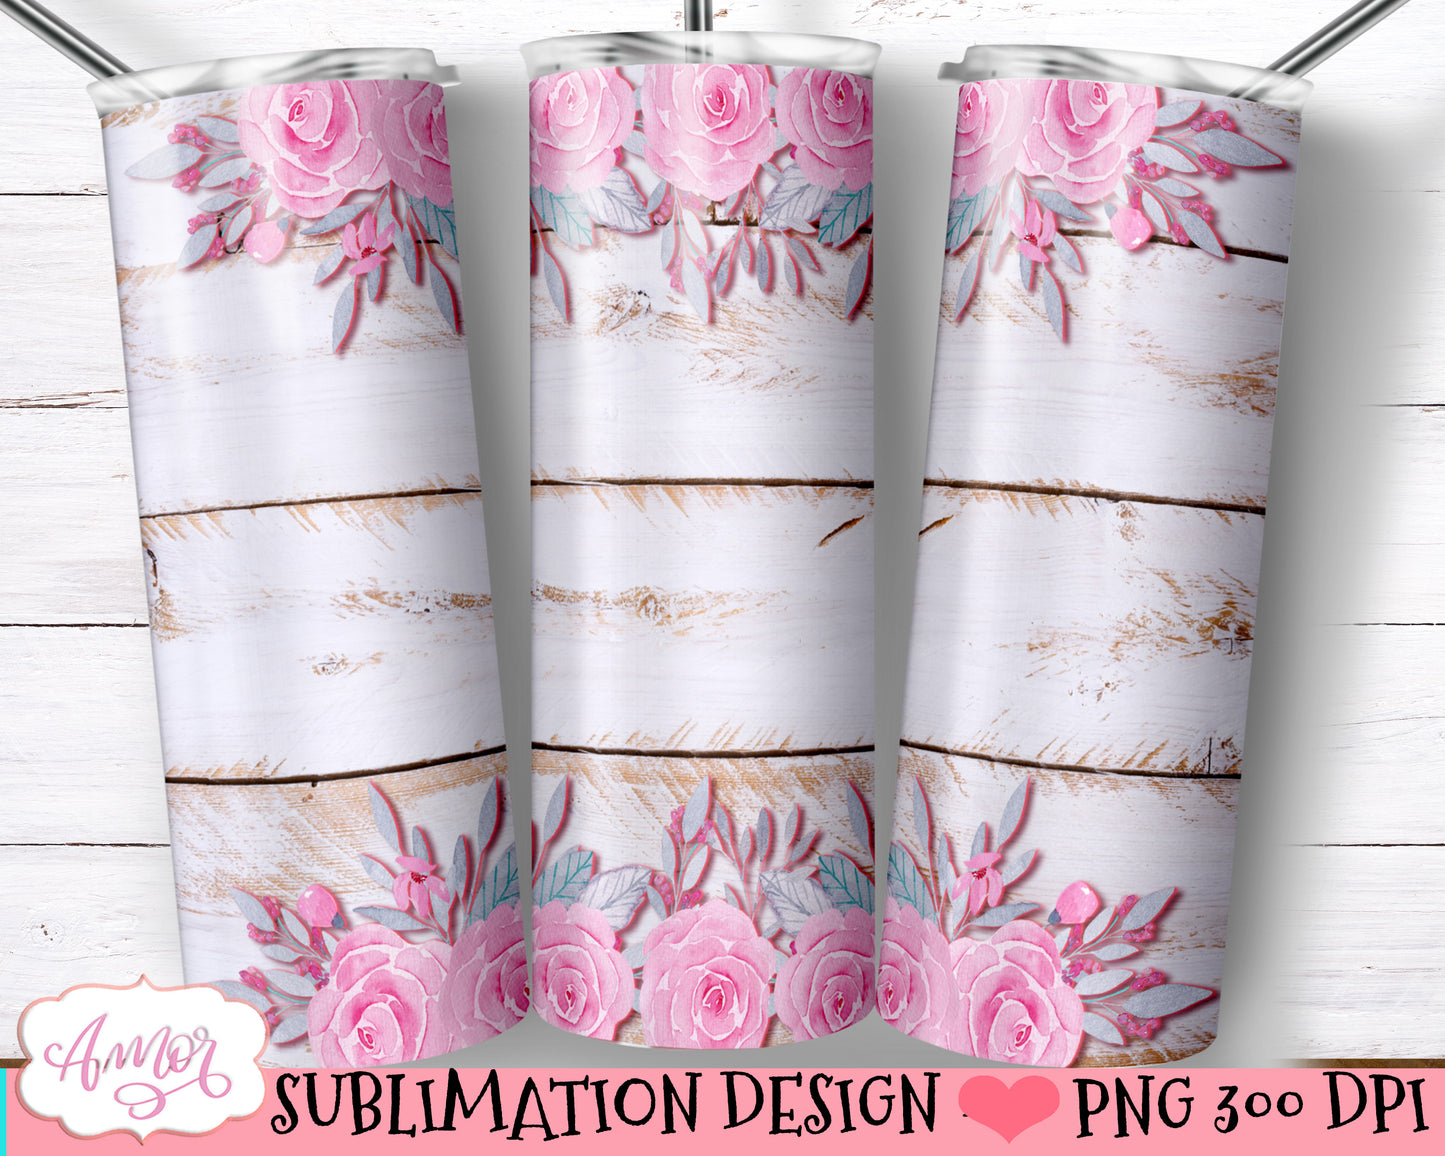 White Wood and Roses tumbler design for sublimation